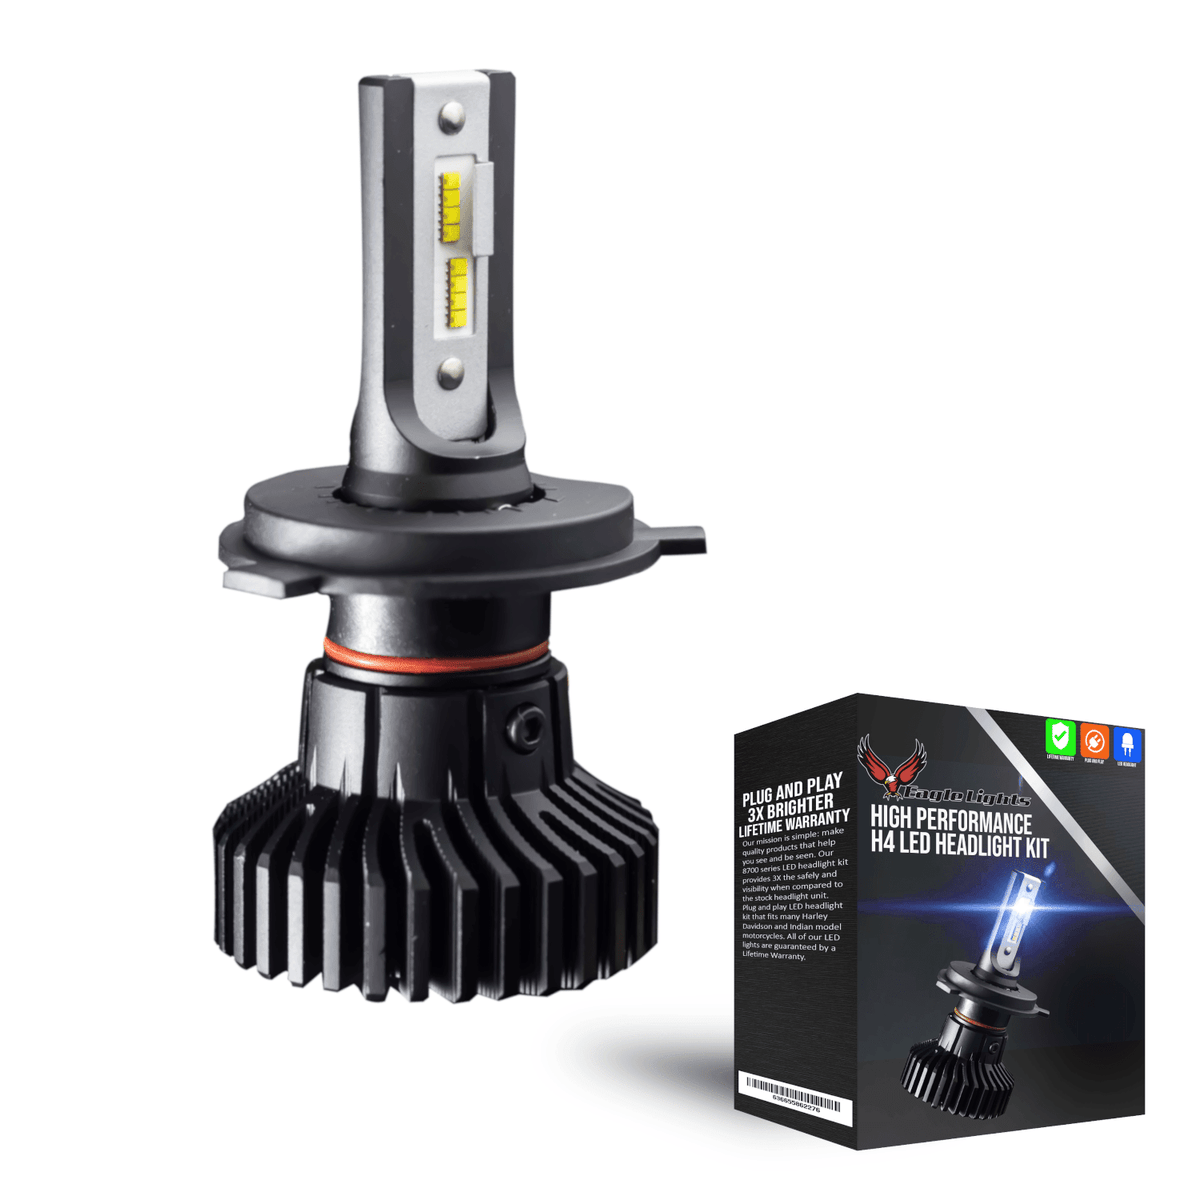 Eagle Lights Infinity Beam H4 / 9003 LED Headlight Bulb for Buell Motorcycles